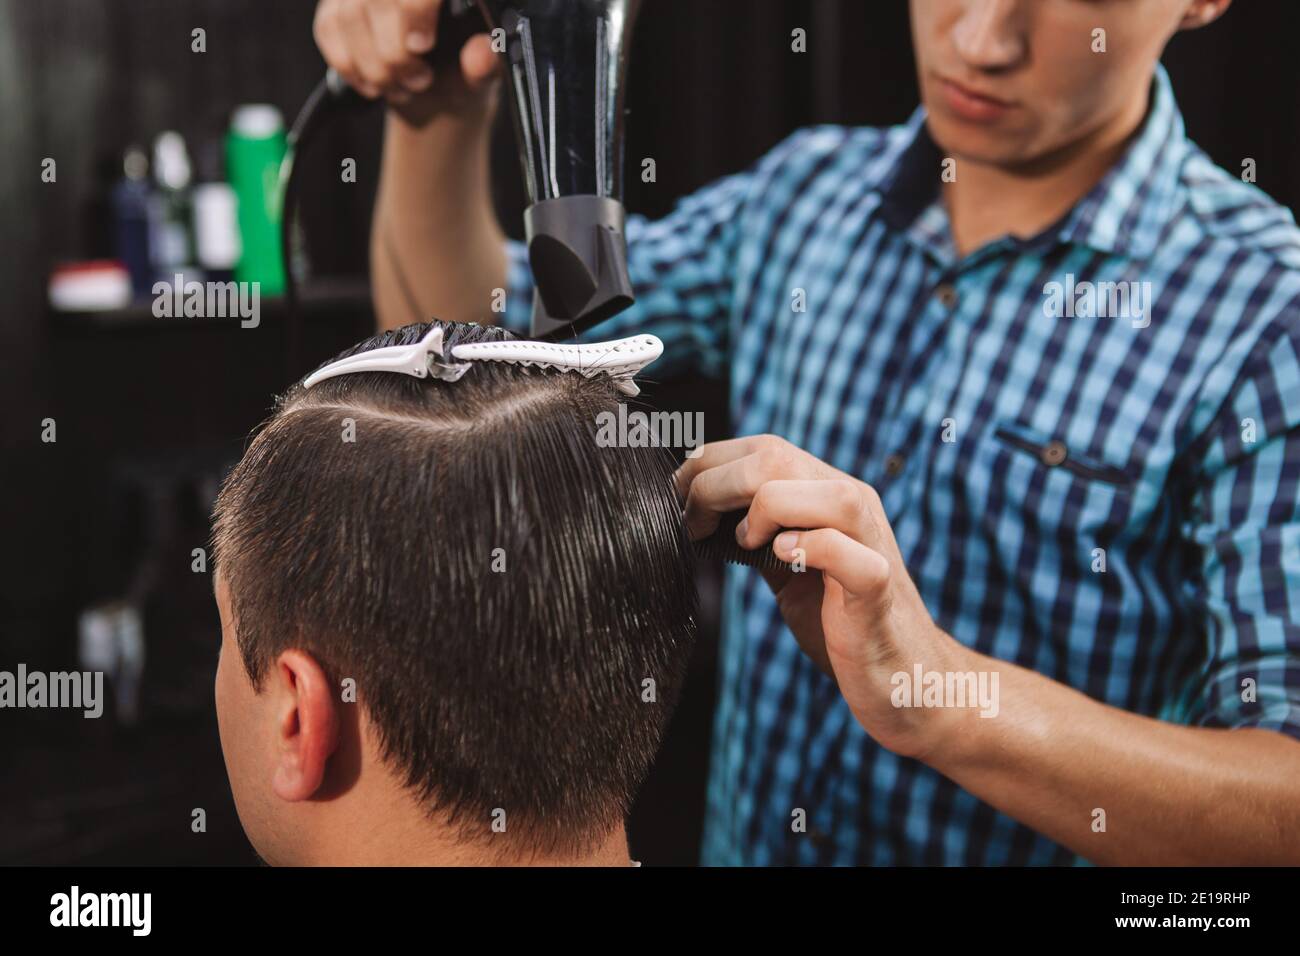 Cropped shot of unrecognizable man getting his hair blow dried by professional barber. Young male hairstylist blow drying hair of a male customer Stock Photo